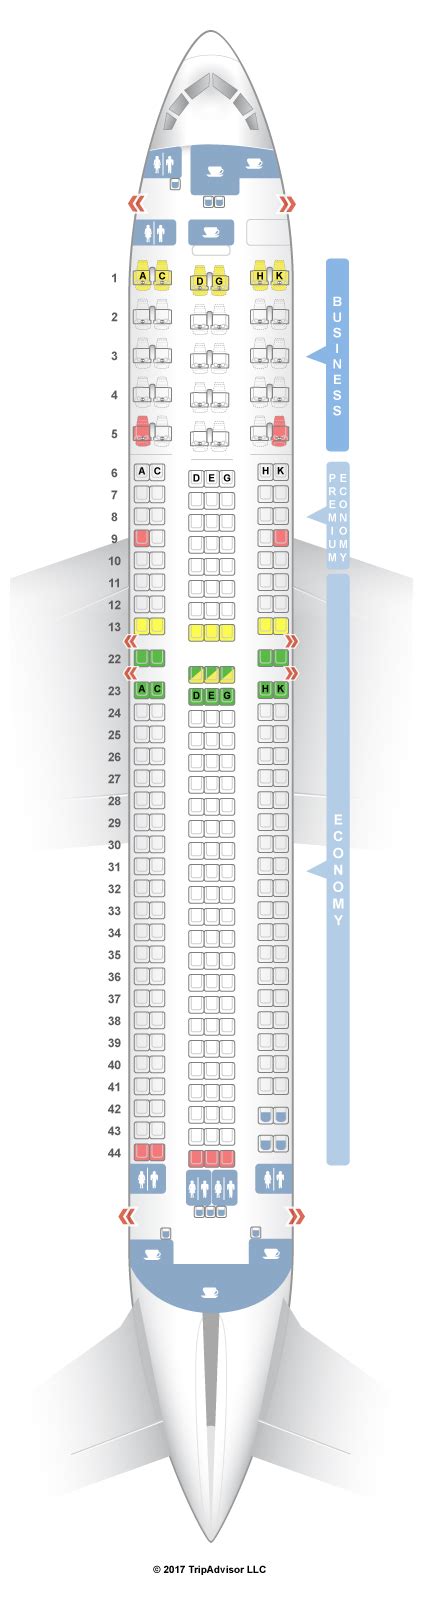 Condor airlines seat map. Browse our alphabetized list of 739 commercial passenger airlines. Find the latest seat map information on the airline operating your flight at SeatMaps 